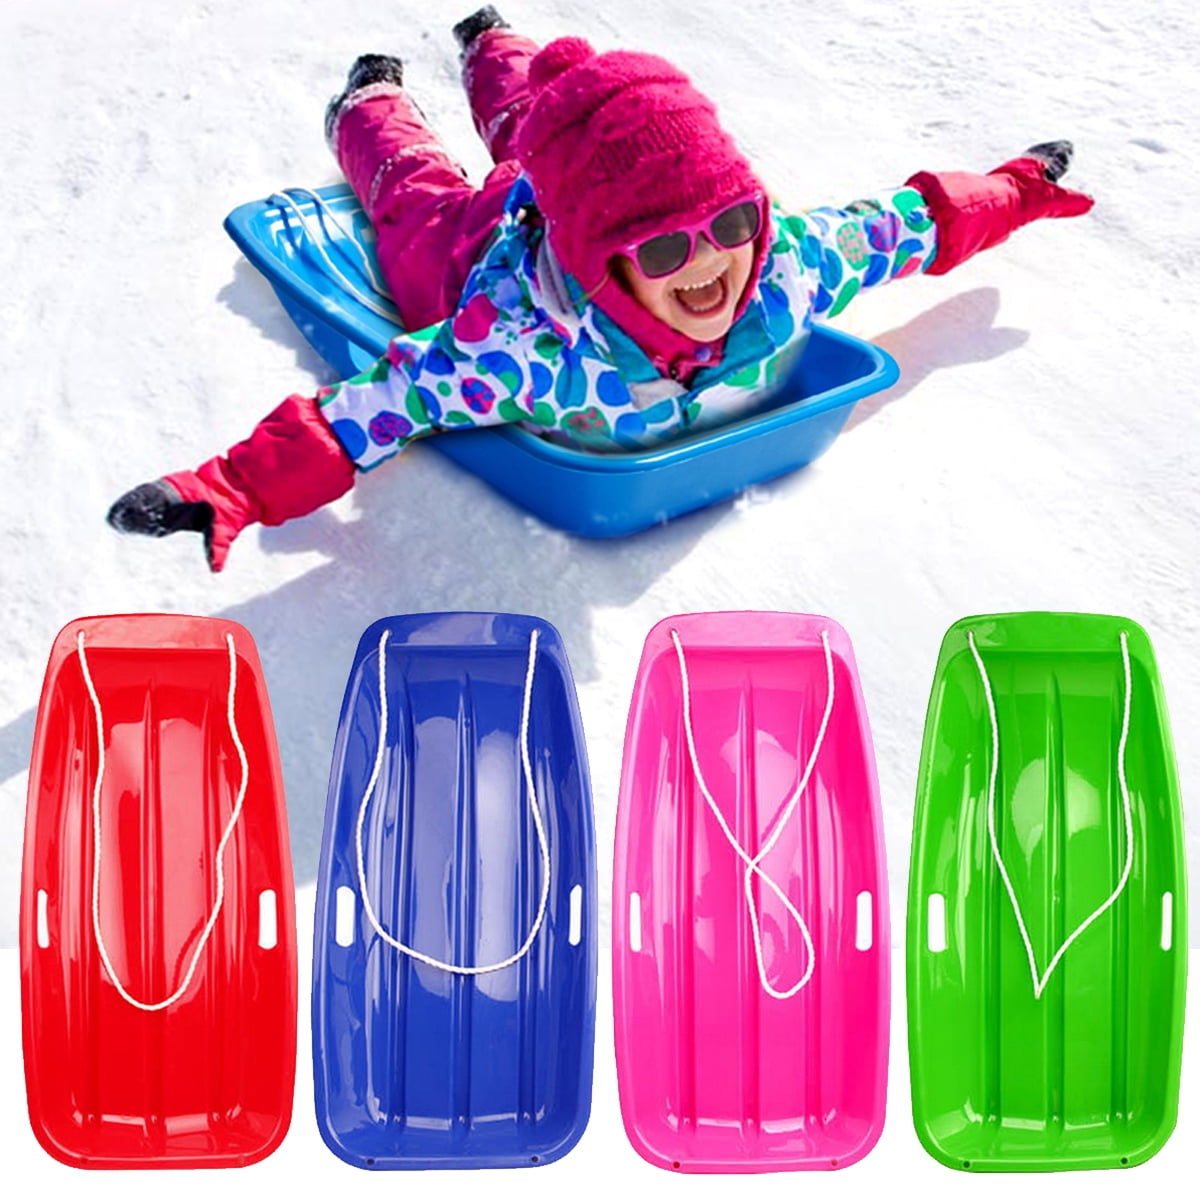 Sleds for Kids Kids and Adult Sleds & Steering Bar Wooden Sled Powder Coated Steel Snow Sleds for Kids and Adult Snow Toys for Kids Outdoor Games & Activities Christmas Decorations 53 Inch Snow Sled 